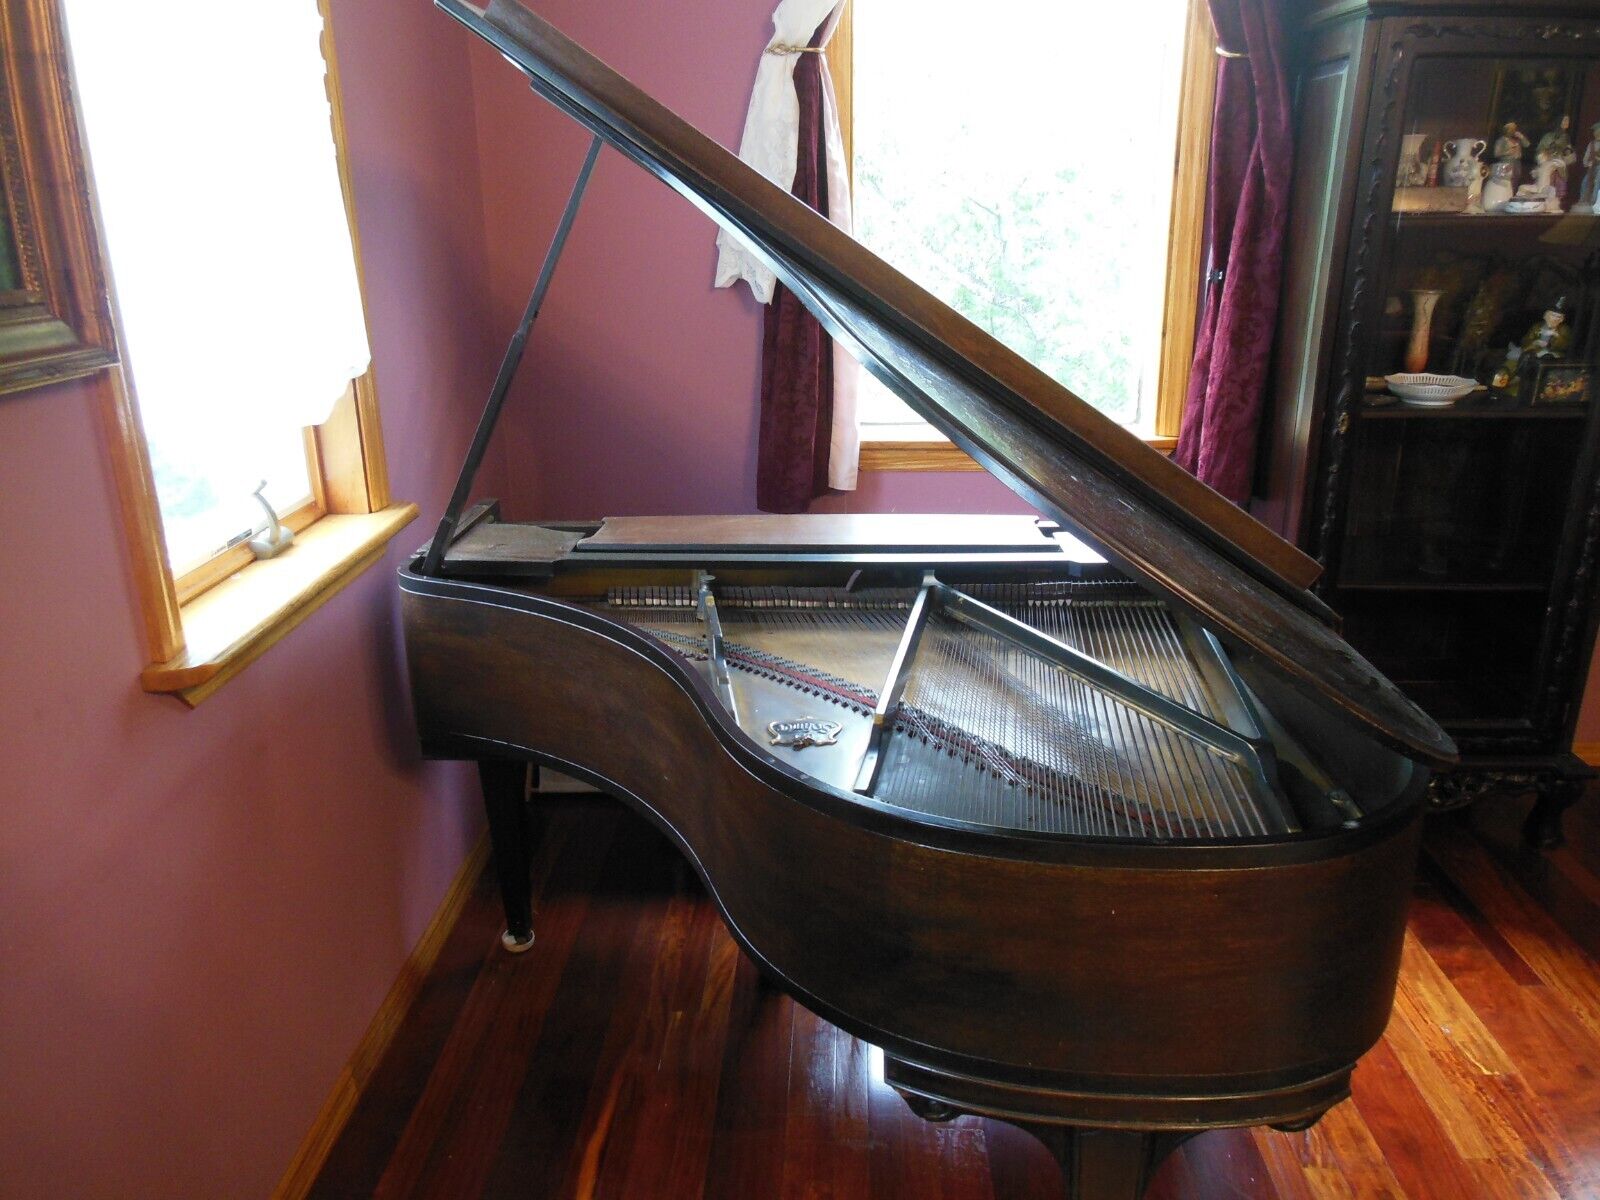 1926 Mohagany Baby Grand Piano, Sohmer & Co. New York, N.Y. With Bench.